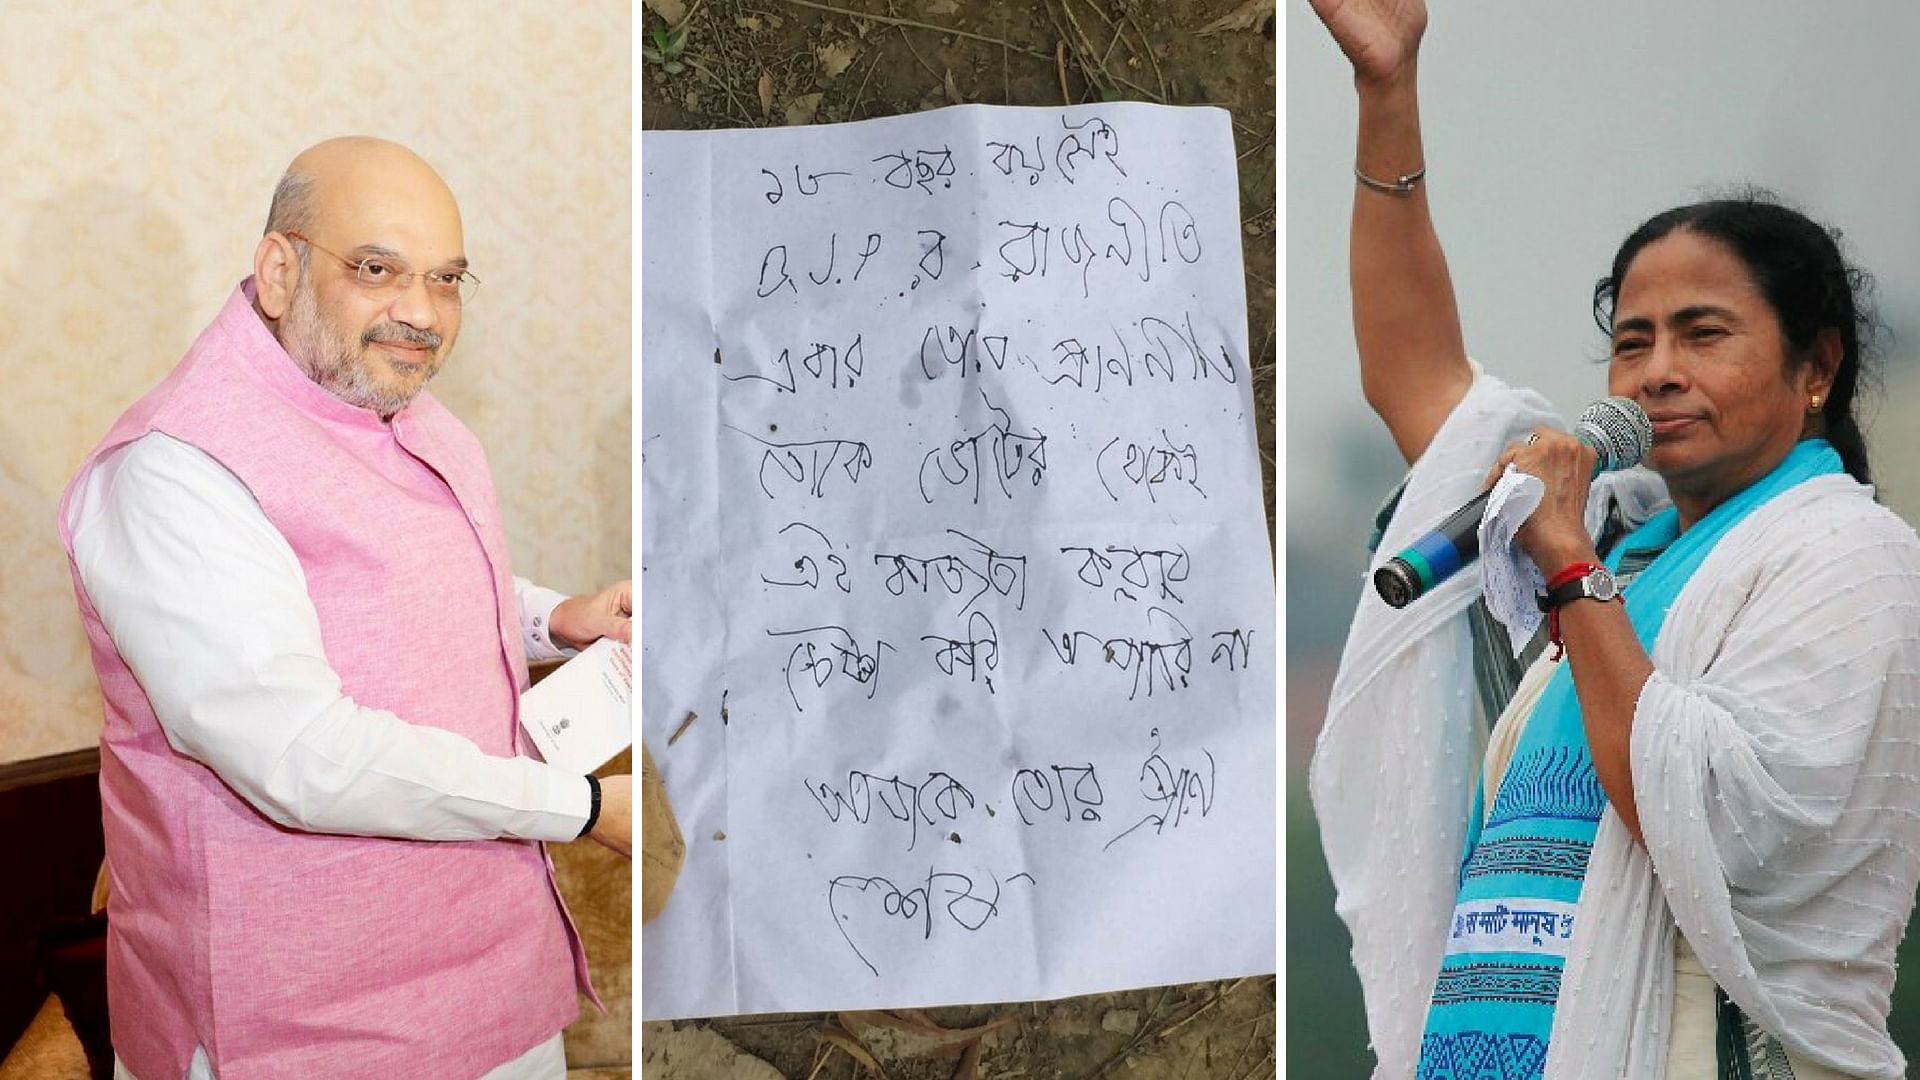  BJP President Amit Shah (left); the note found on the deceased (middle); and West Bengal Chief Minister Mamata Banerjee (right).